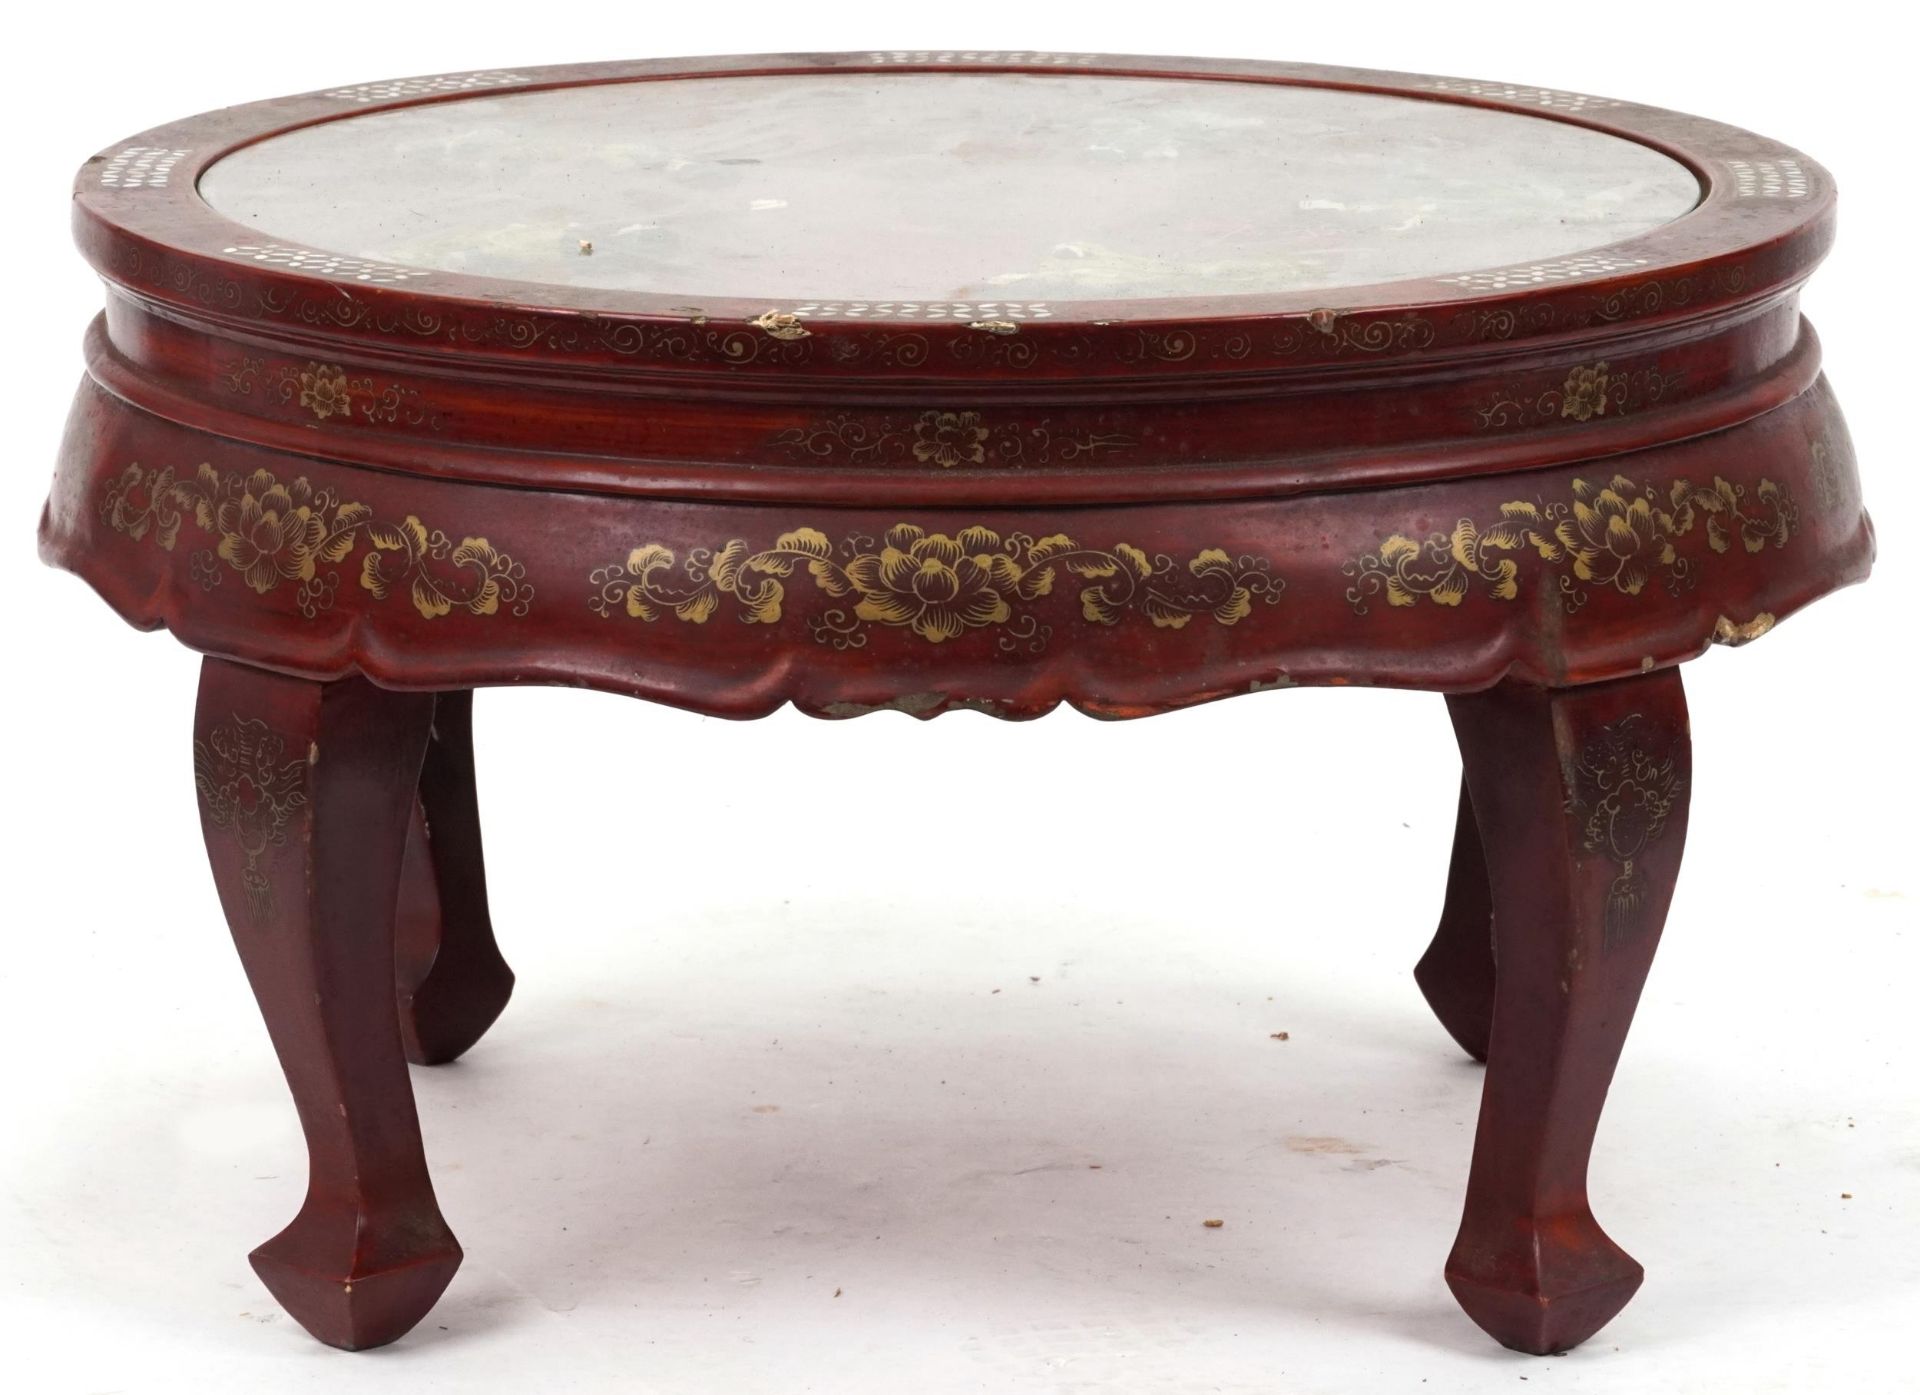 Chinese red lacquered chinoiserie centre table with inset glass top, mother of pearl and hardstone